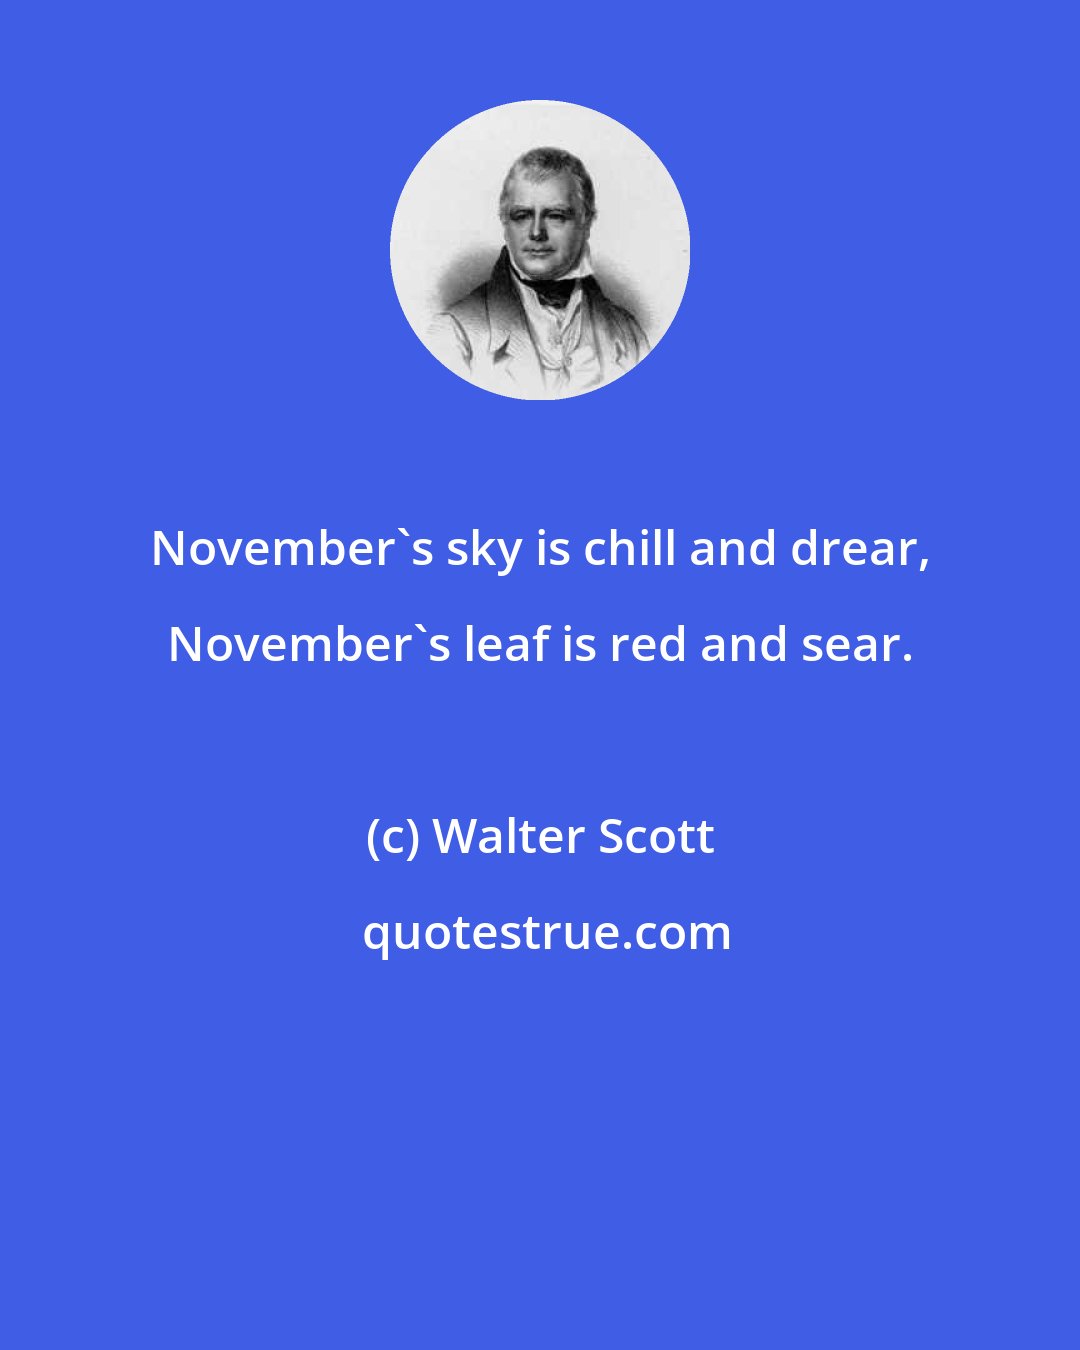 Walter Scott: November's sky is chill and drear, November's leaf is red and sear.